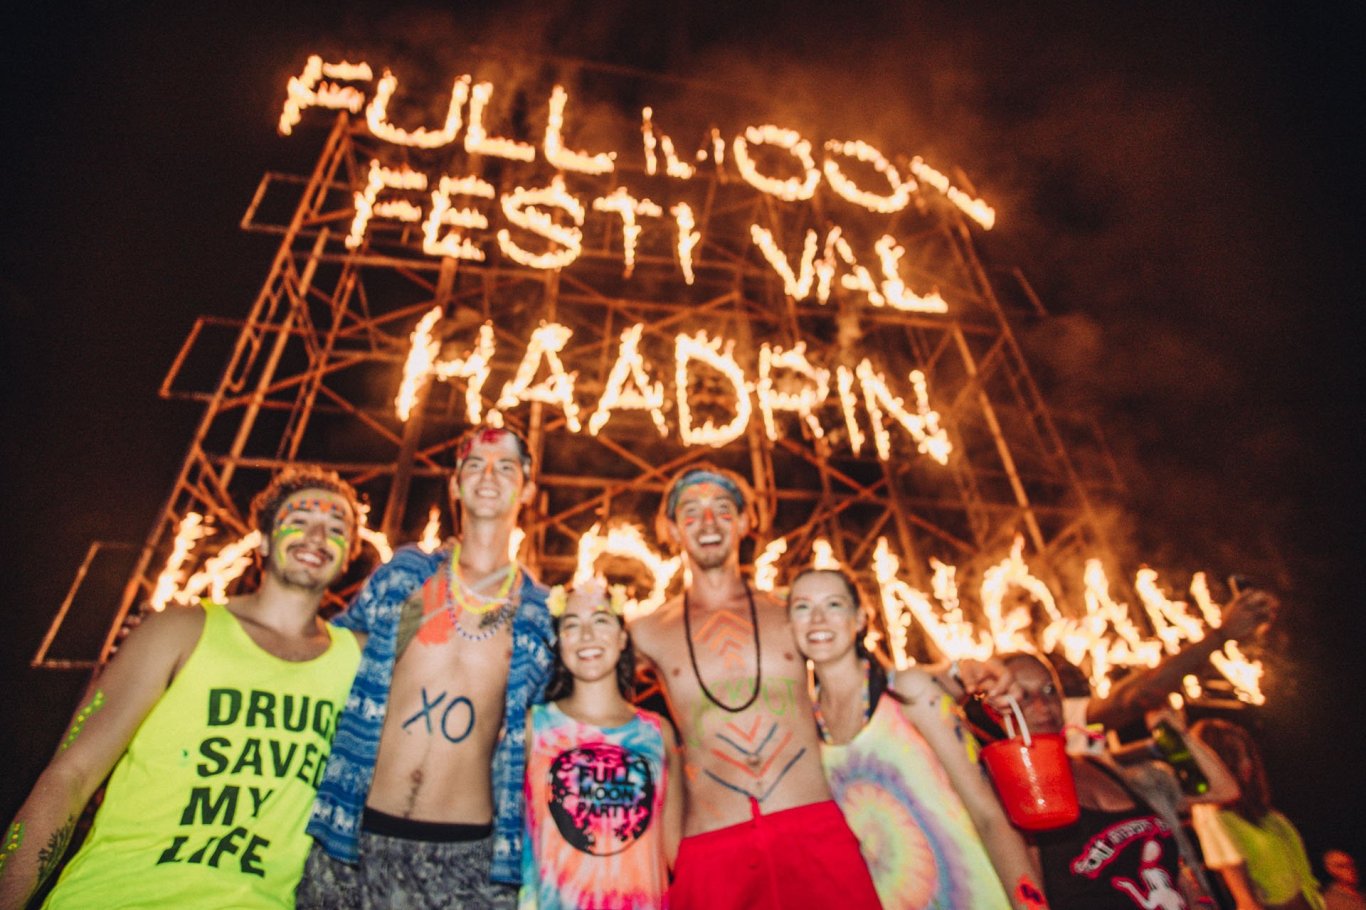 A group photo at the full moon party by a sign made of fire in Koh Phangan Thailand